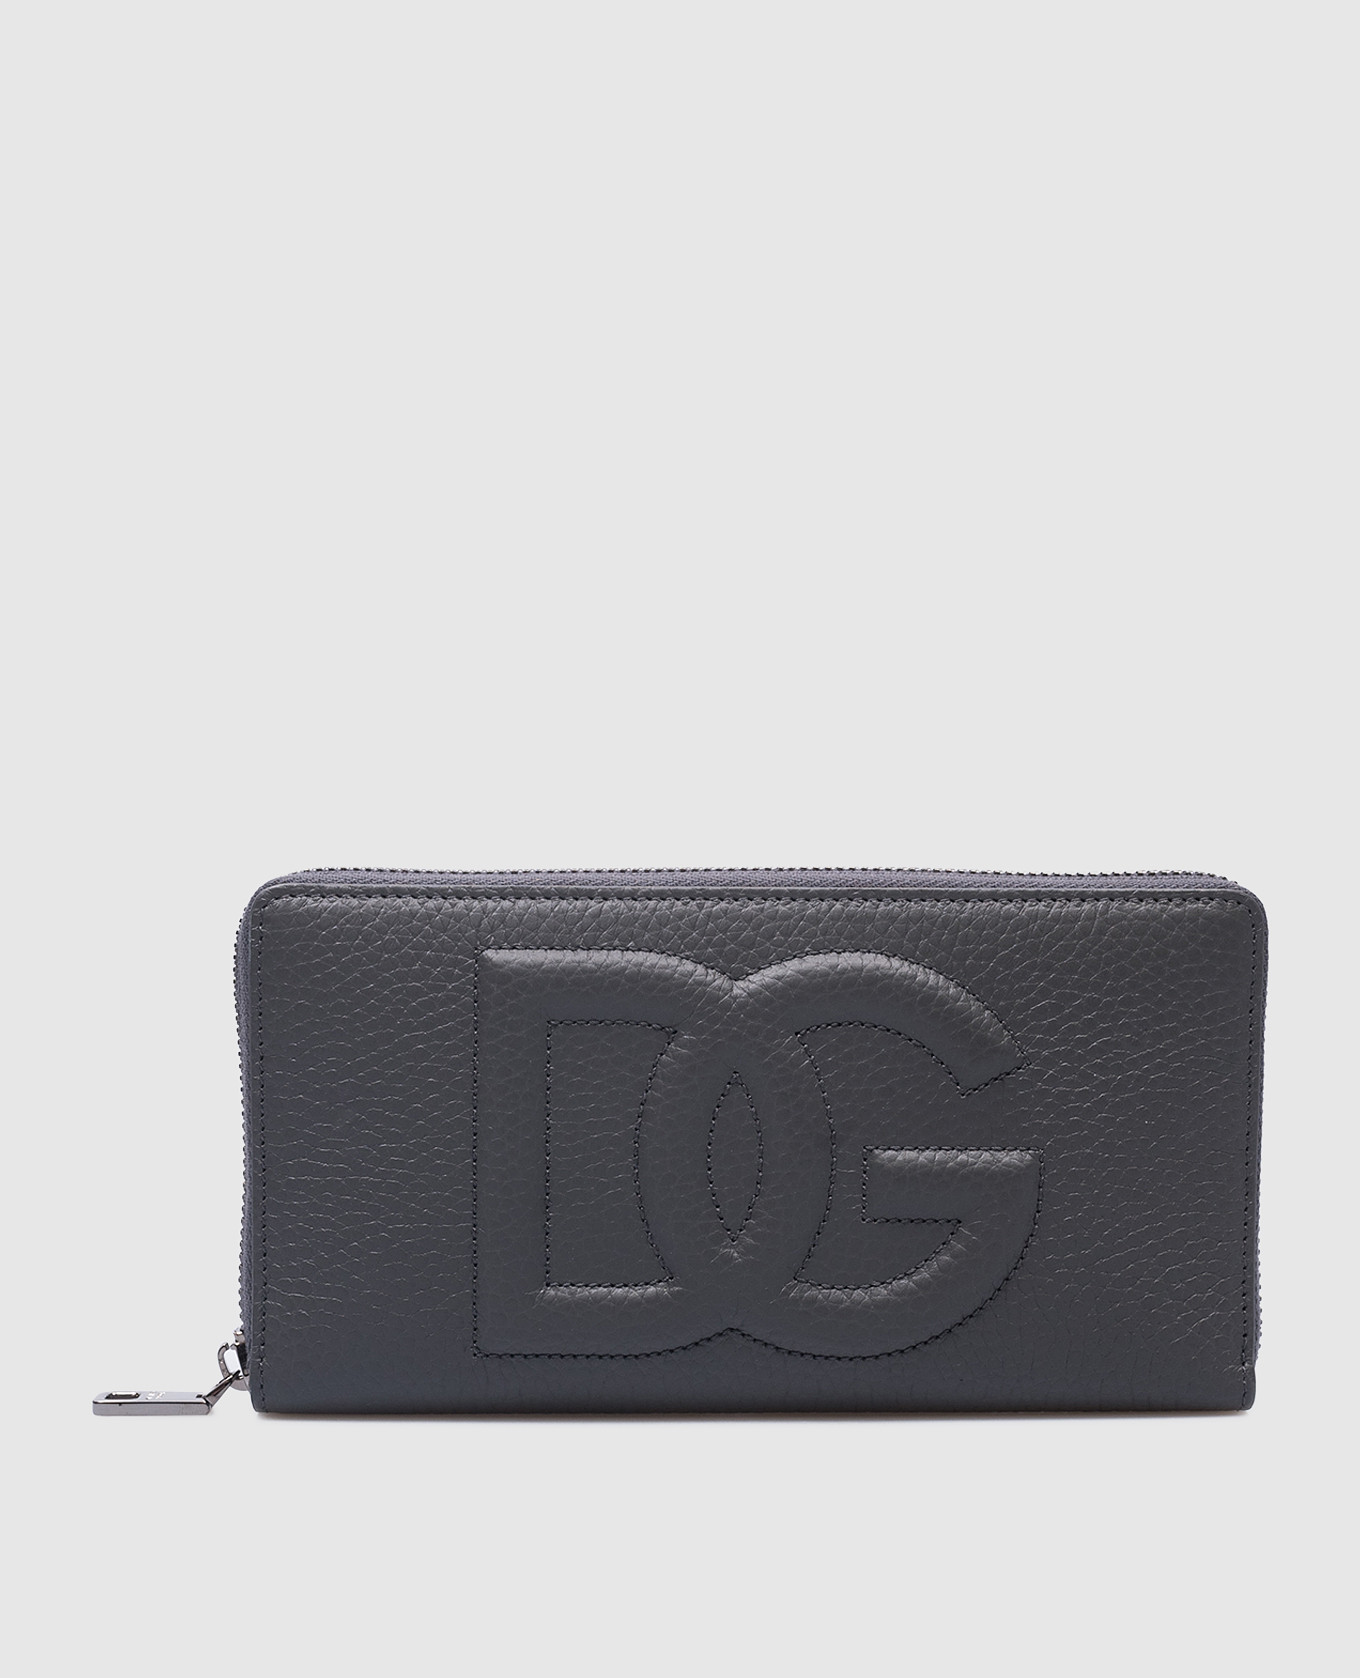 DG LOGO gray leather wallet with textured logo